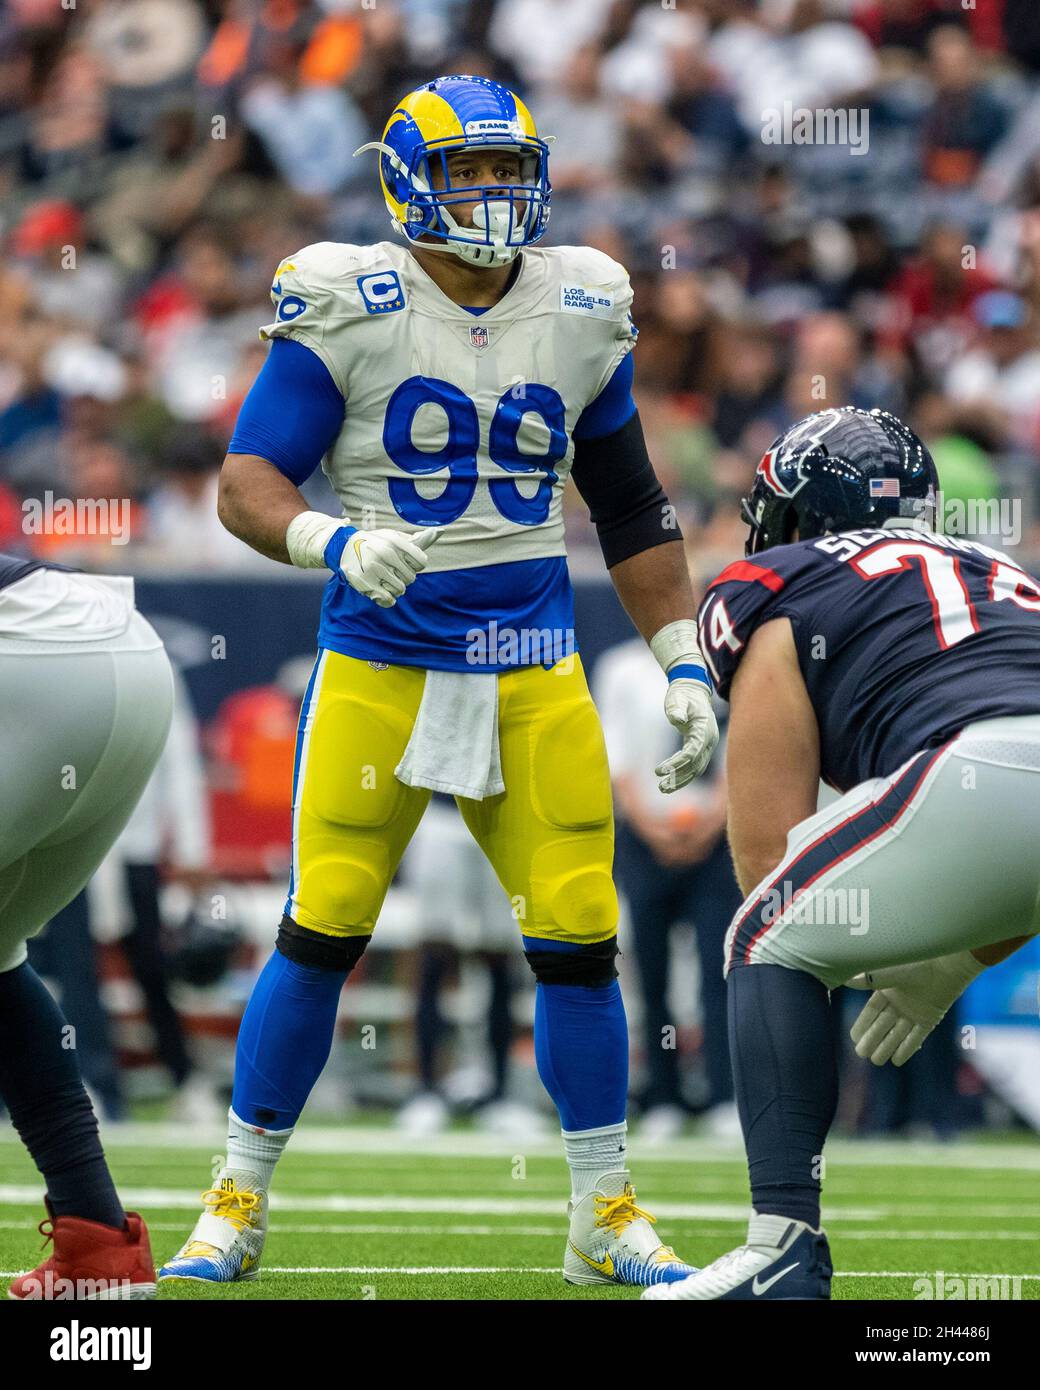 Houston, Texas, USA. October 31. DT Aaron Donald #99 of the Los